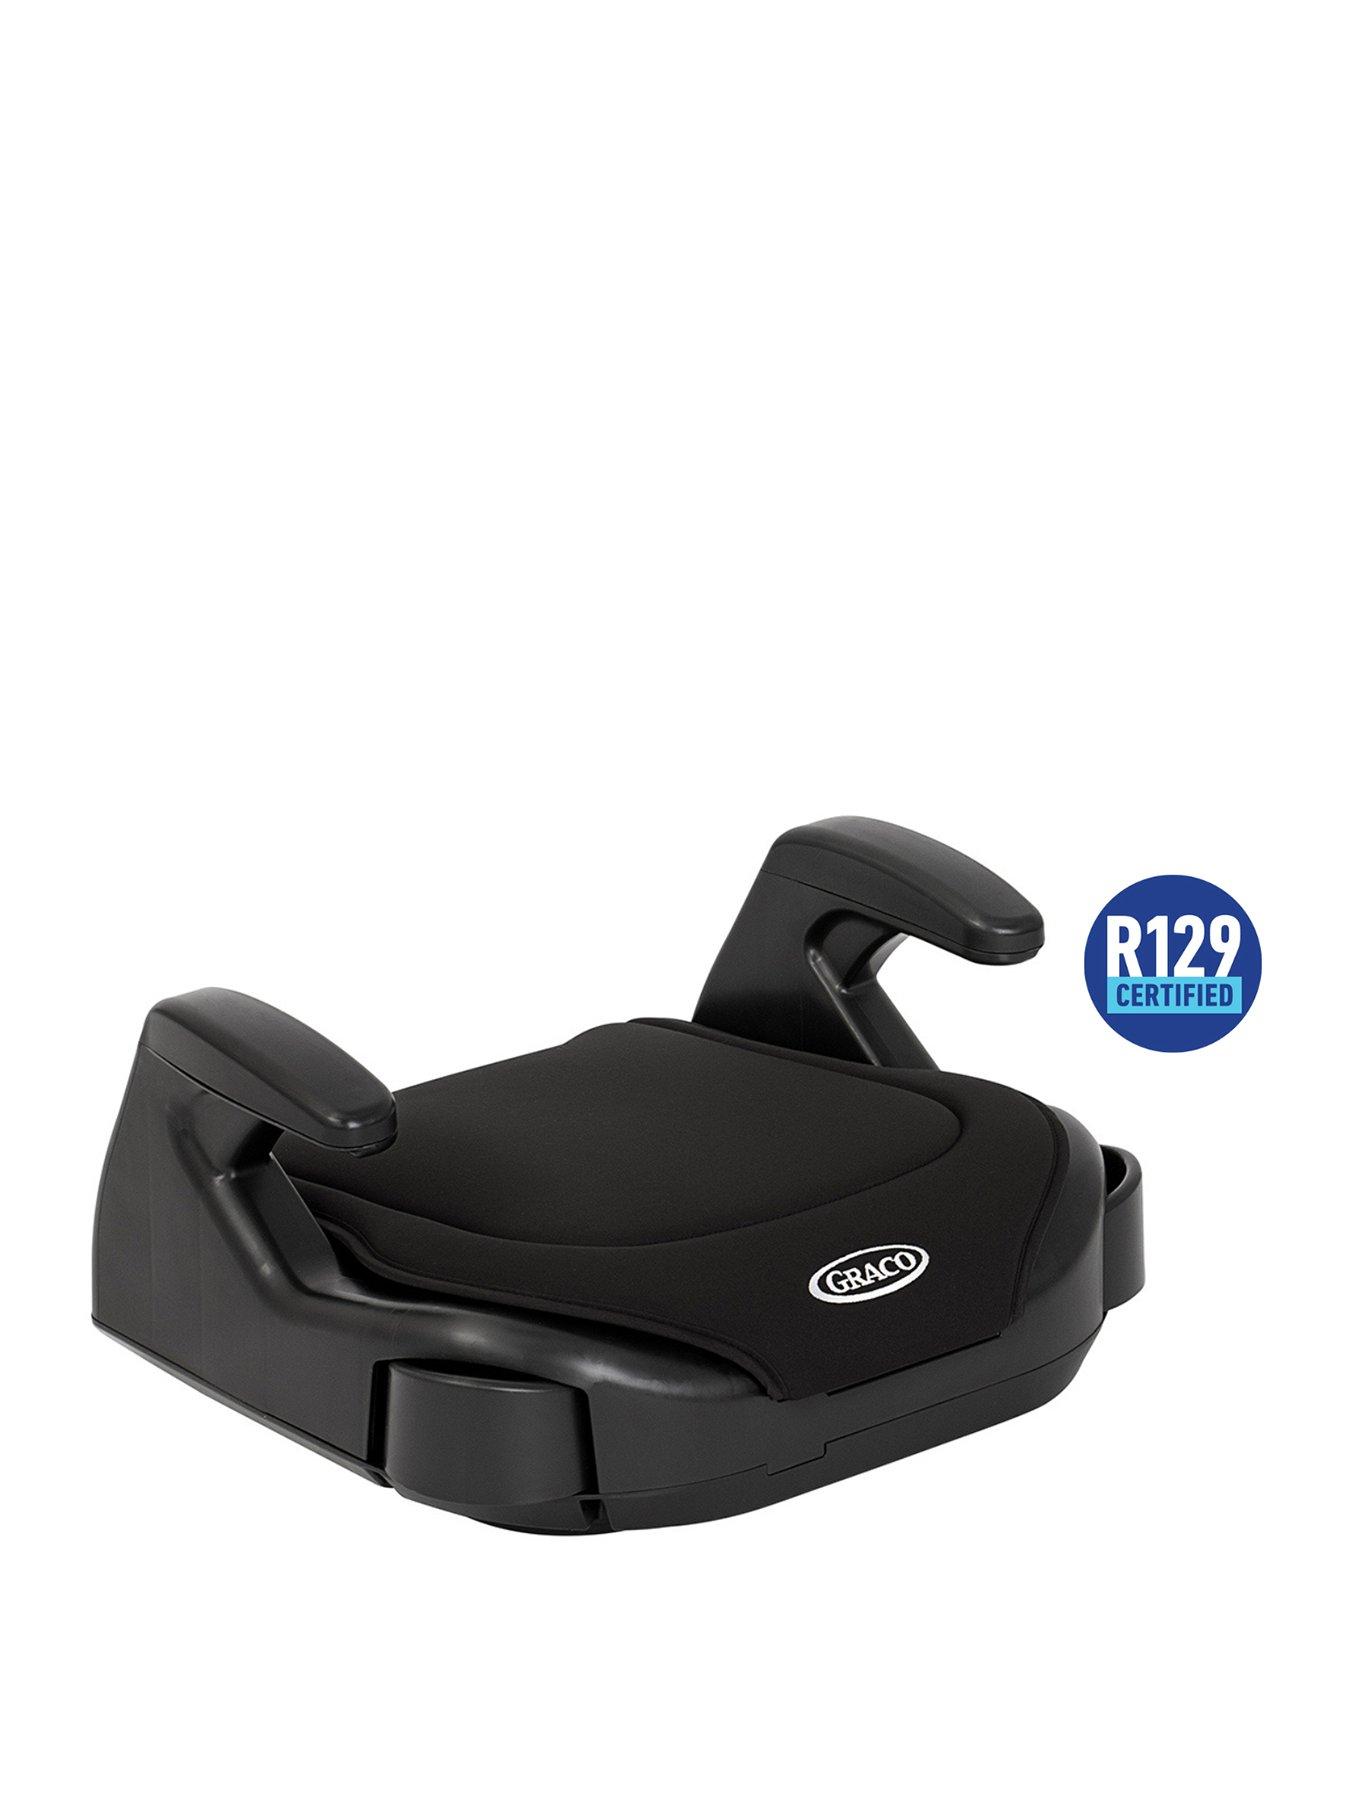 Graco Booster Basic R129 Car Seat - Midnight